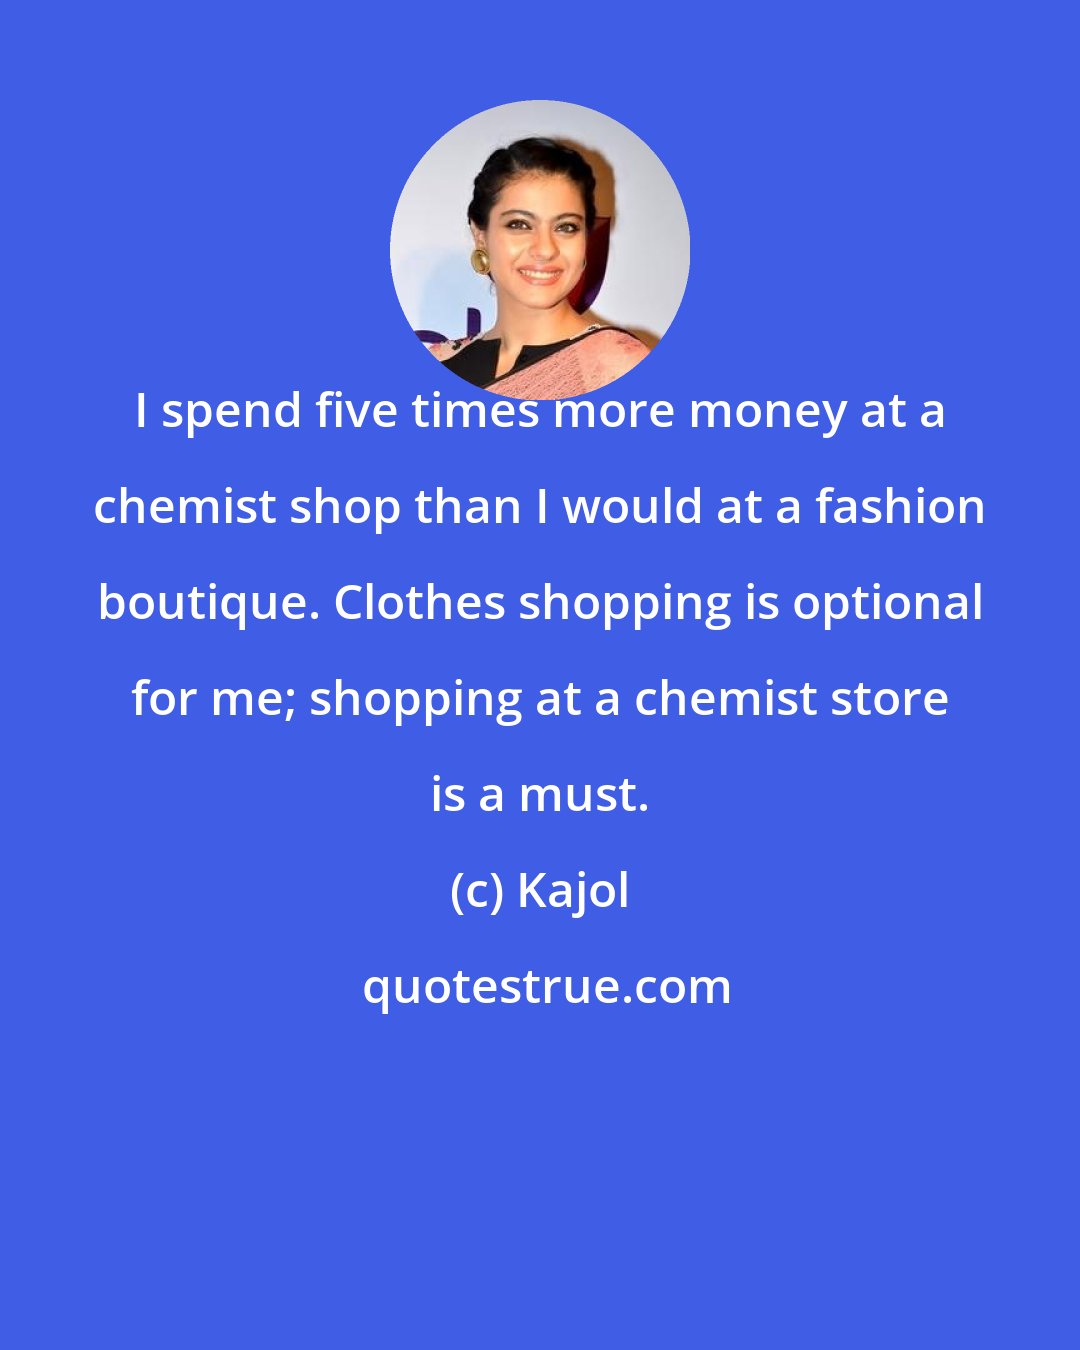 Kajol: I spend five times more money at a chemist shop than I would at a fashion boutique. Clothes shopping is optional for me; shopping at a chemist store is a must.